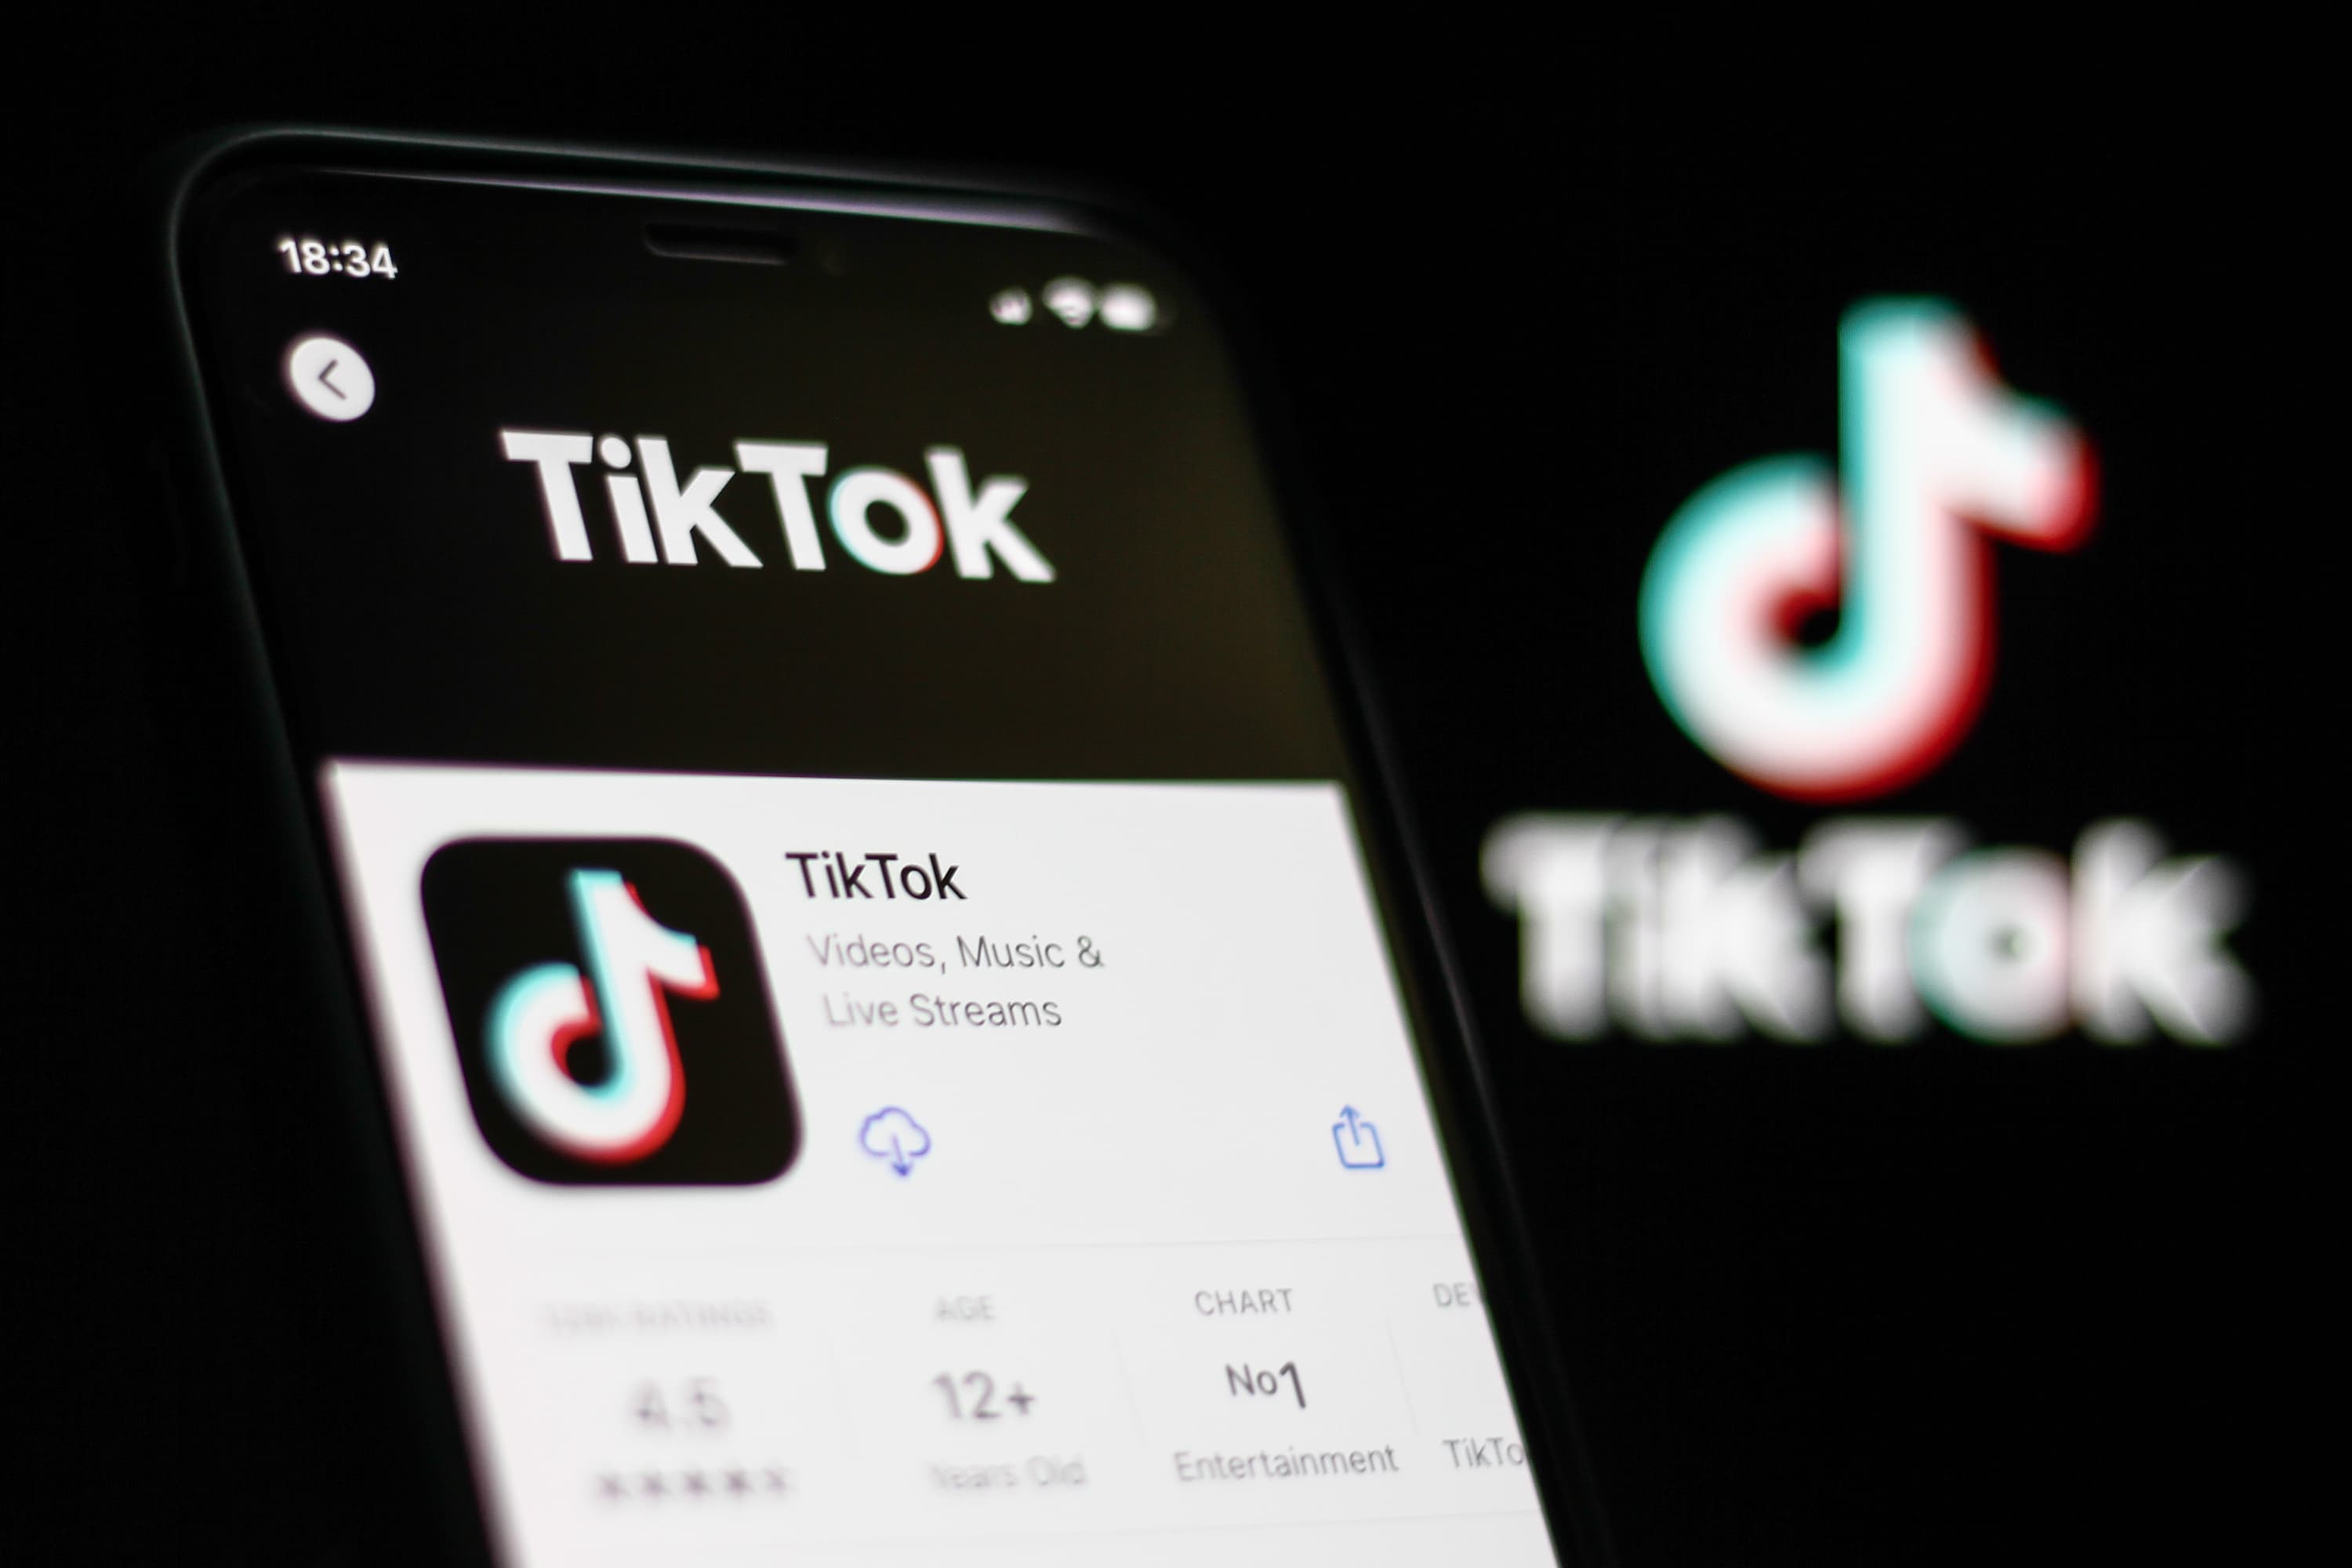 GUANGZHOU, China - TikTok owner ByteDance's finance chief will step down to focus on his role as CEO of the short video app, according to an internal memo obtained by CNBC. Shou Zi Chew joined ByteDance as CFO from smartphone maker Xiaomi in March, sparking speculation the company could be on track for an initial public offering.